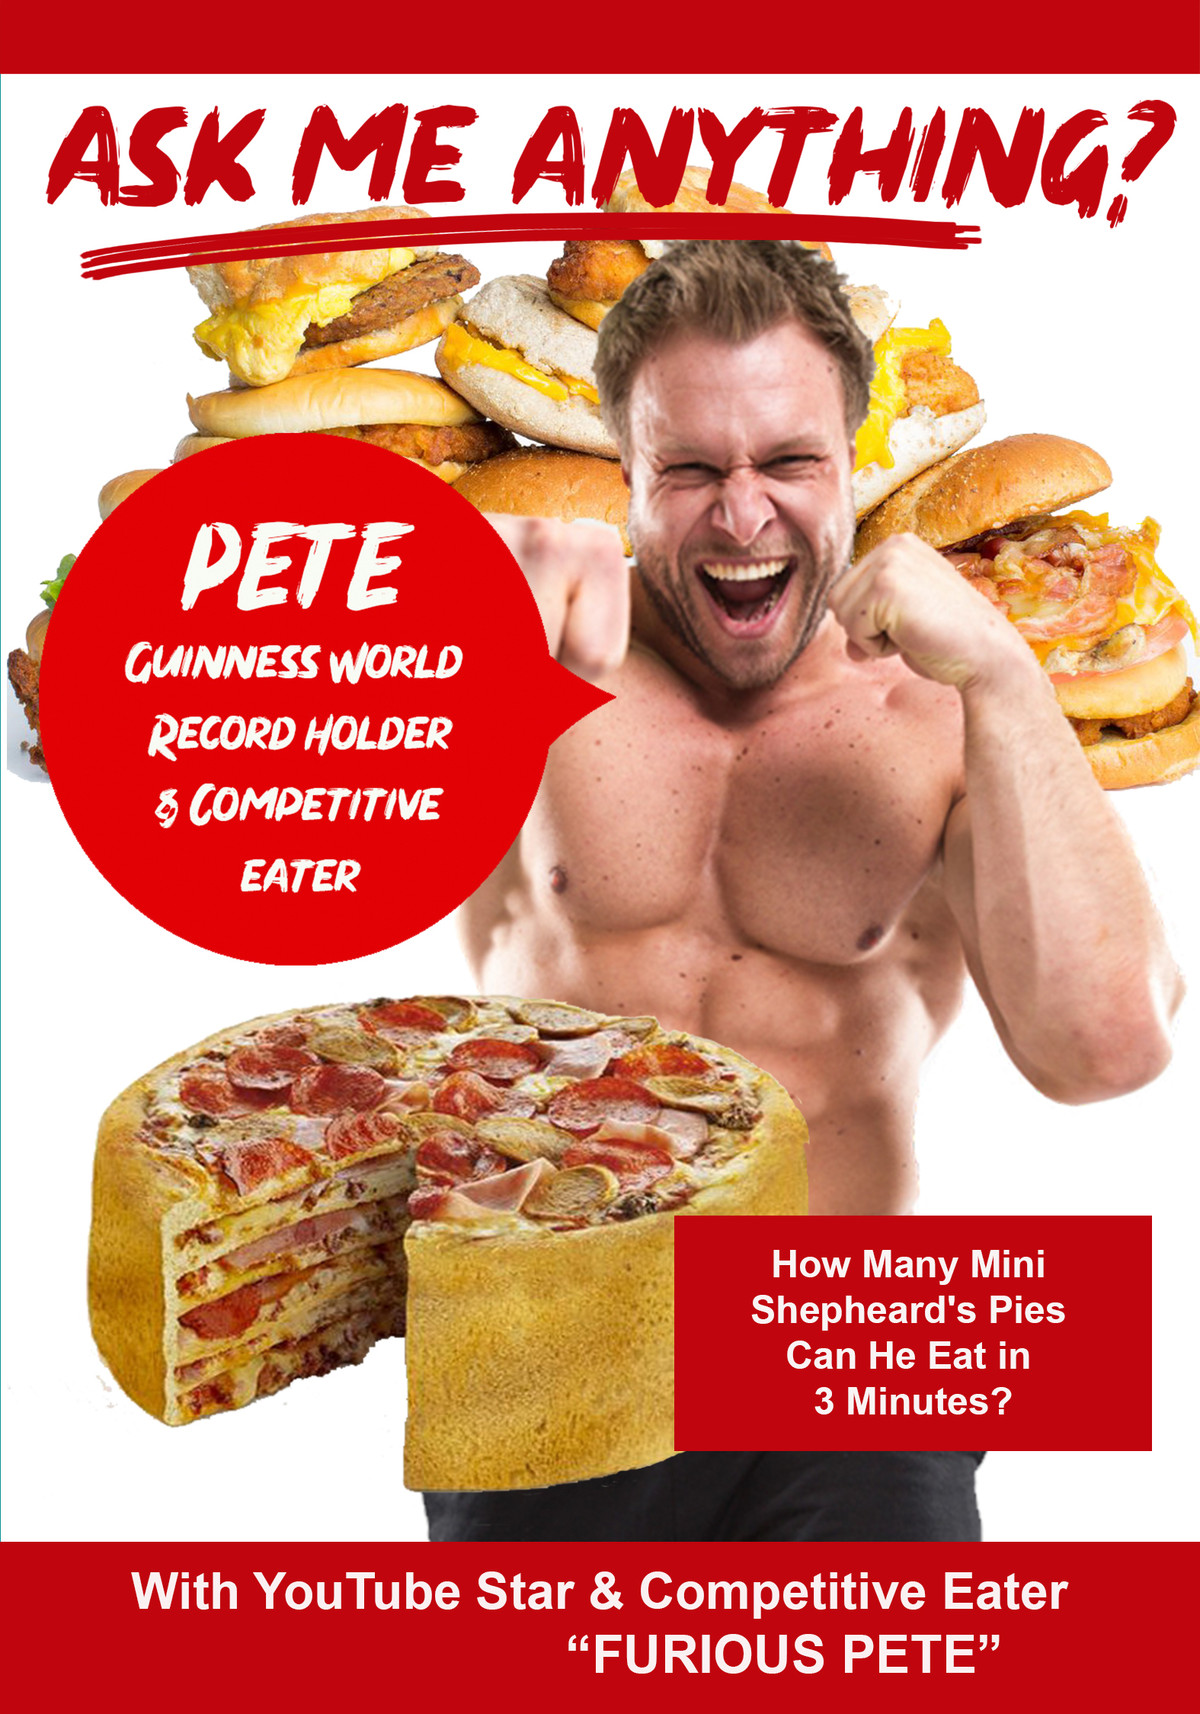 K4834 - Ask Me Anything about being a YouTube Star & Competitive Eater with Furious Pete